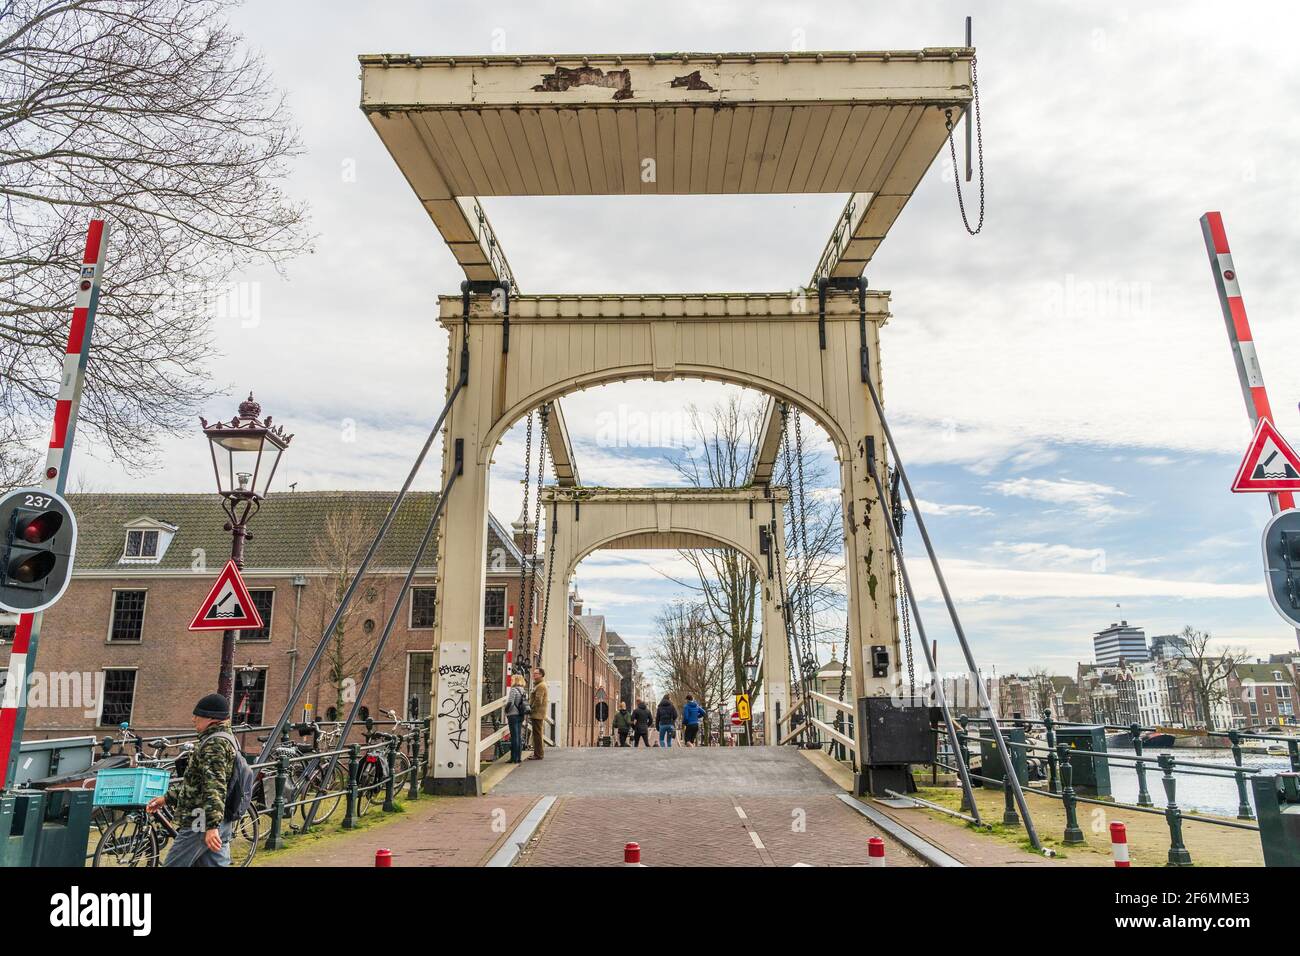 Amsterdam, Netherlands - March 2020: Magere Brug or Skinny Bridge on Amstel river, bascule bridge made of white-painted wood. Stock Photo